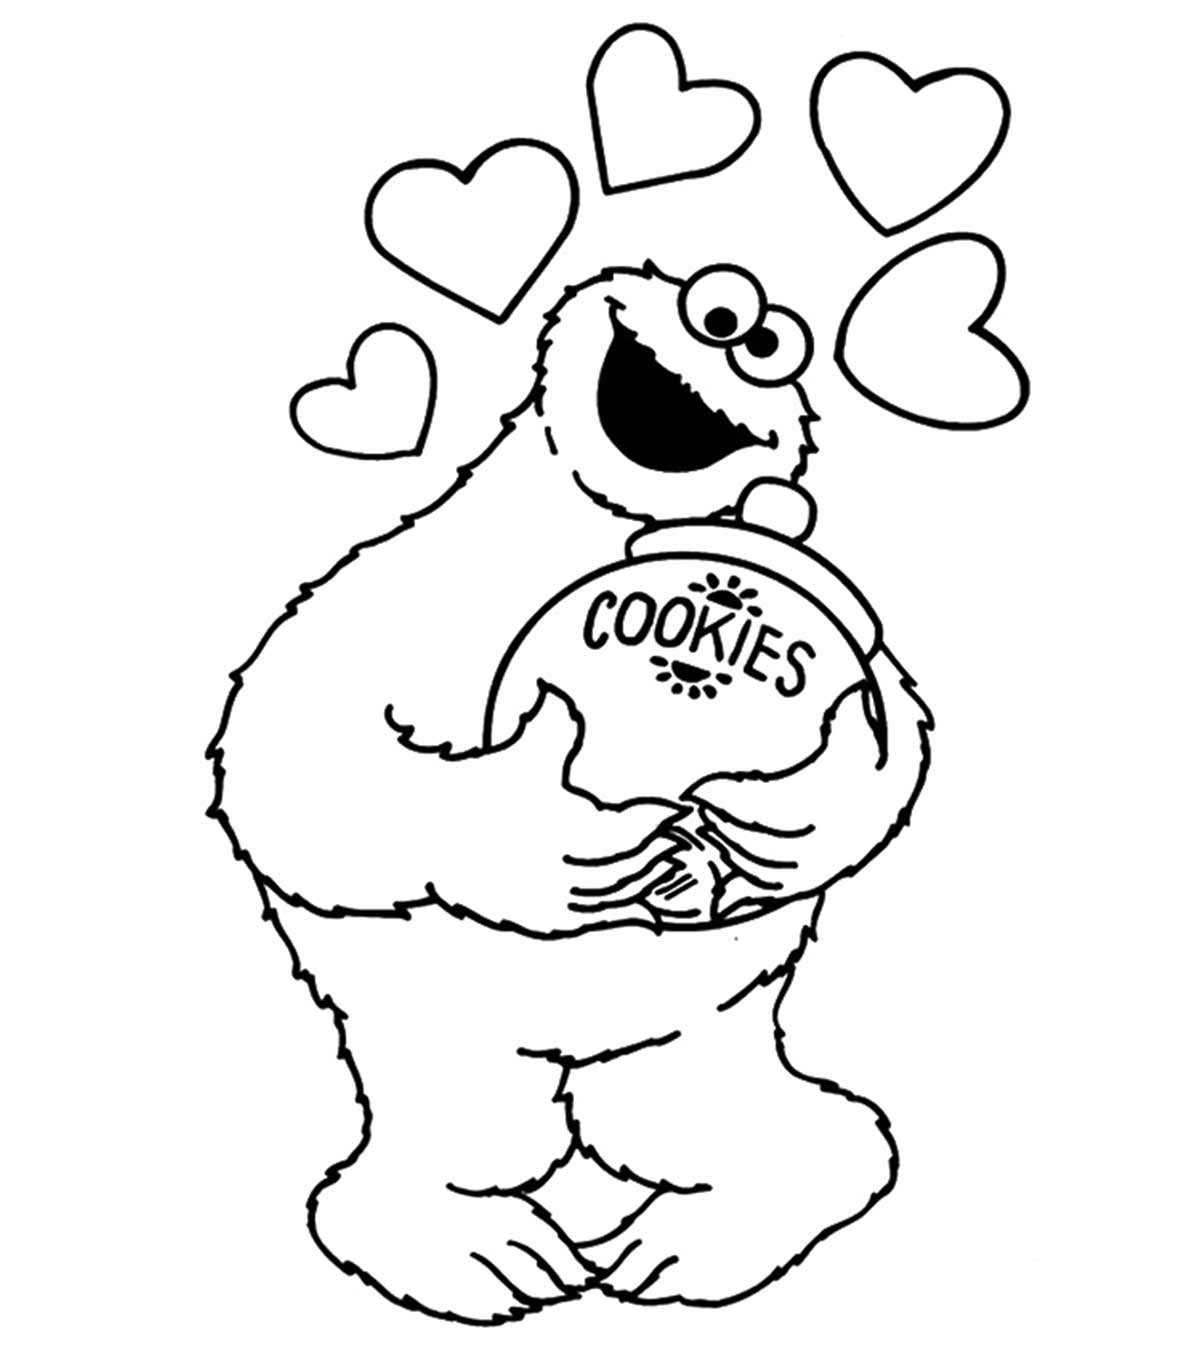 25 Cute & Funny Cookie Monster Coloring Pages Your Toddler Will Love